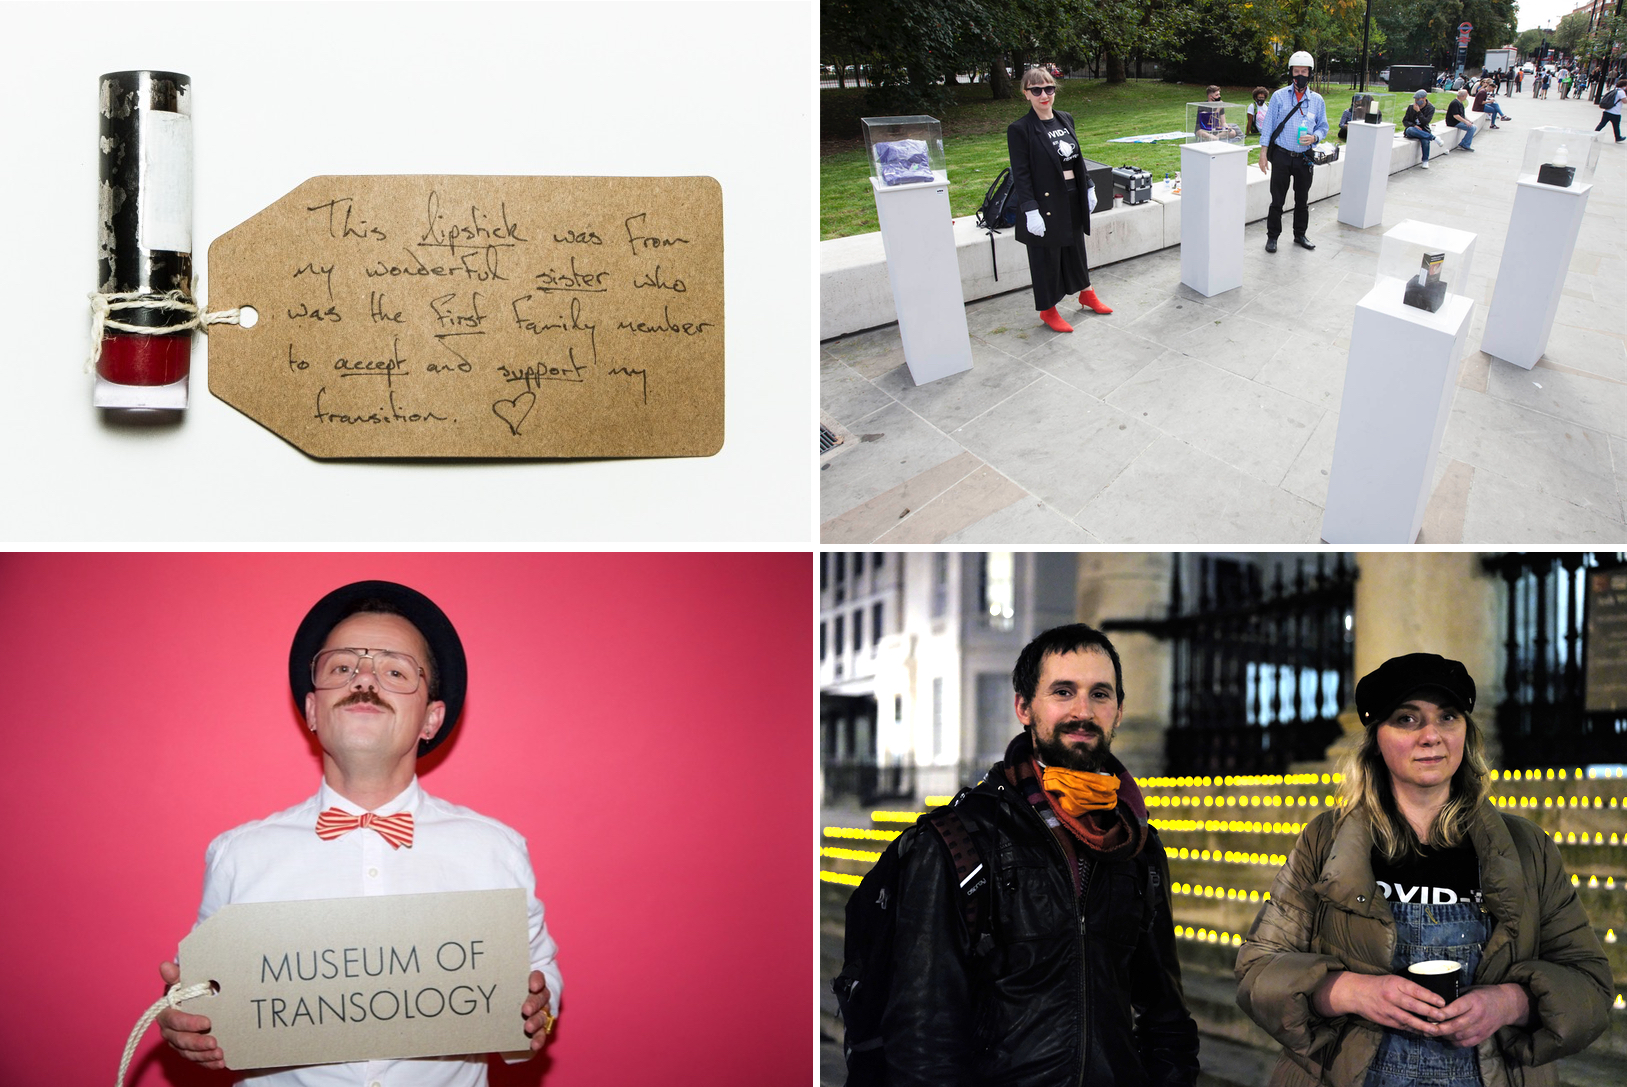 Four images show, clockwise from top left: a red lipstick with an attached label that reads: "This lipstick was from my wonderful sister who was the first family member to accept and support my transition"; a street installation by the Museum of Homelessness with objects on tall white plinths on a pavement; Matt and Jess Turtle, founders of the Museum of Homelessness, standing in front of the steps of a church - the steps are lined with hundreds of small lights; E-J Scott, founder of the Museum of Transology, who holds a large label with the museum's name on it.